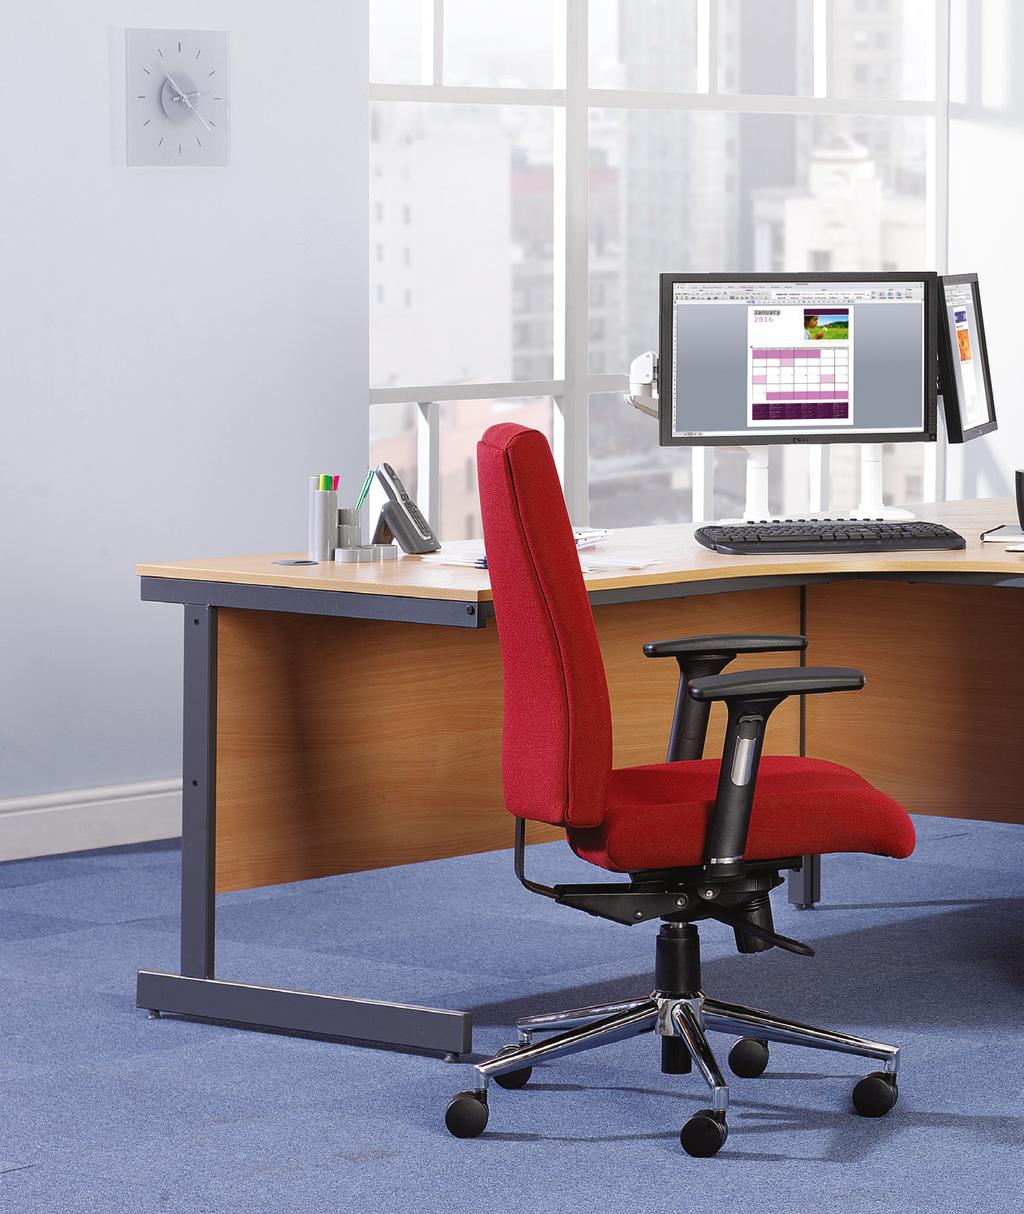 Maestro ommercial desking range With a design that s stood the test of time across multiple organisational settings, Maestro defined the industry standards for 18mm desking and is designed to help